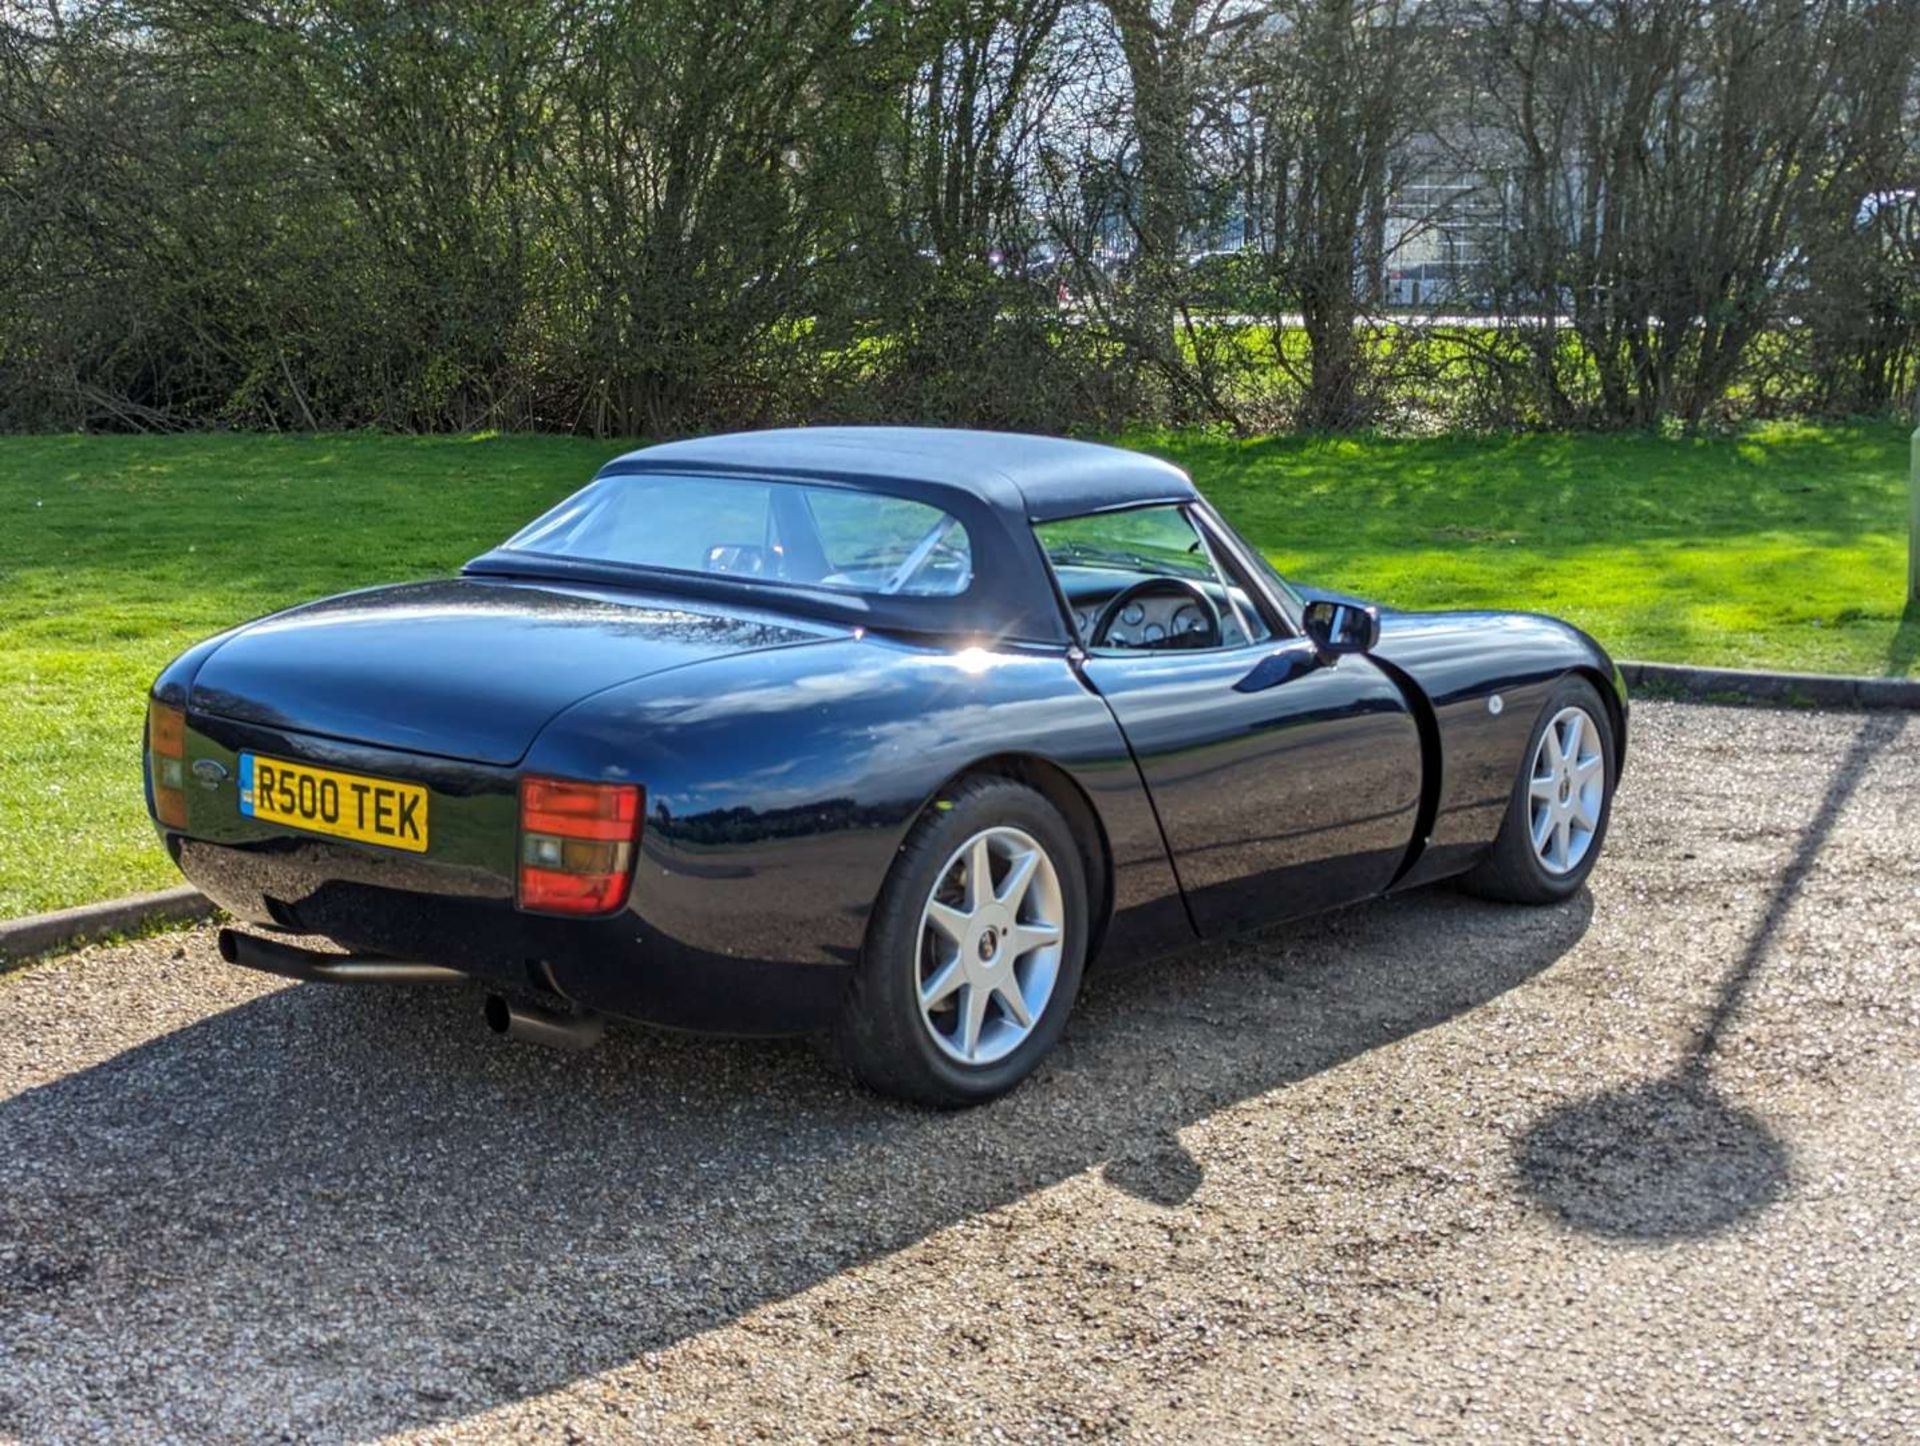 1997 TVR GRIFFITH 5.0 - Image 8 of 29